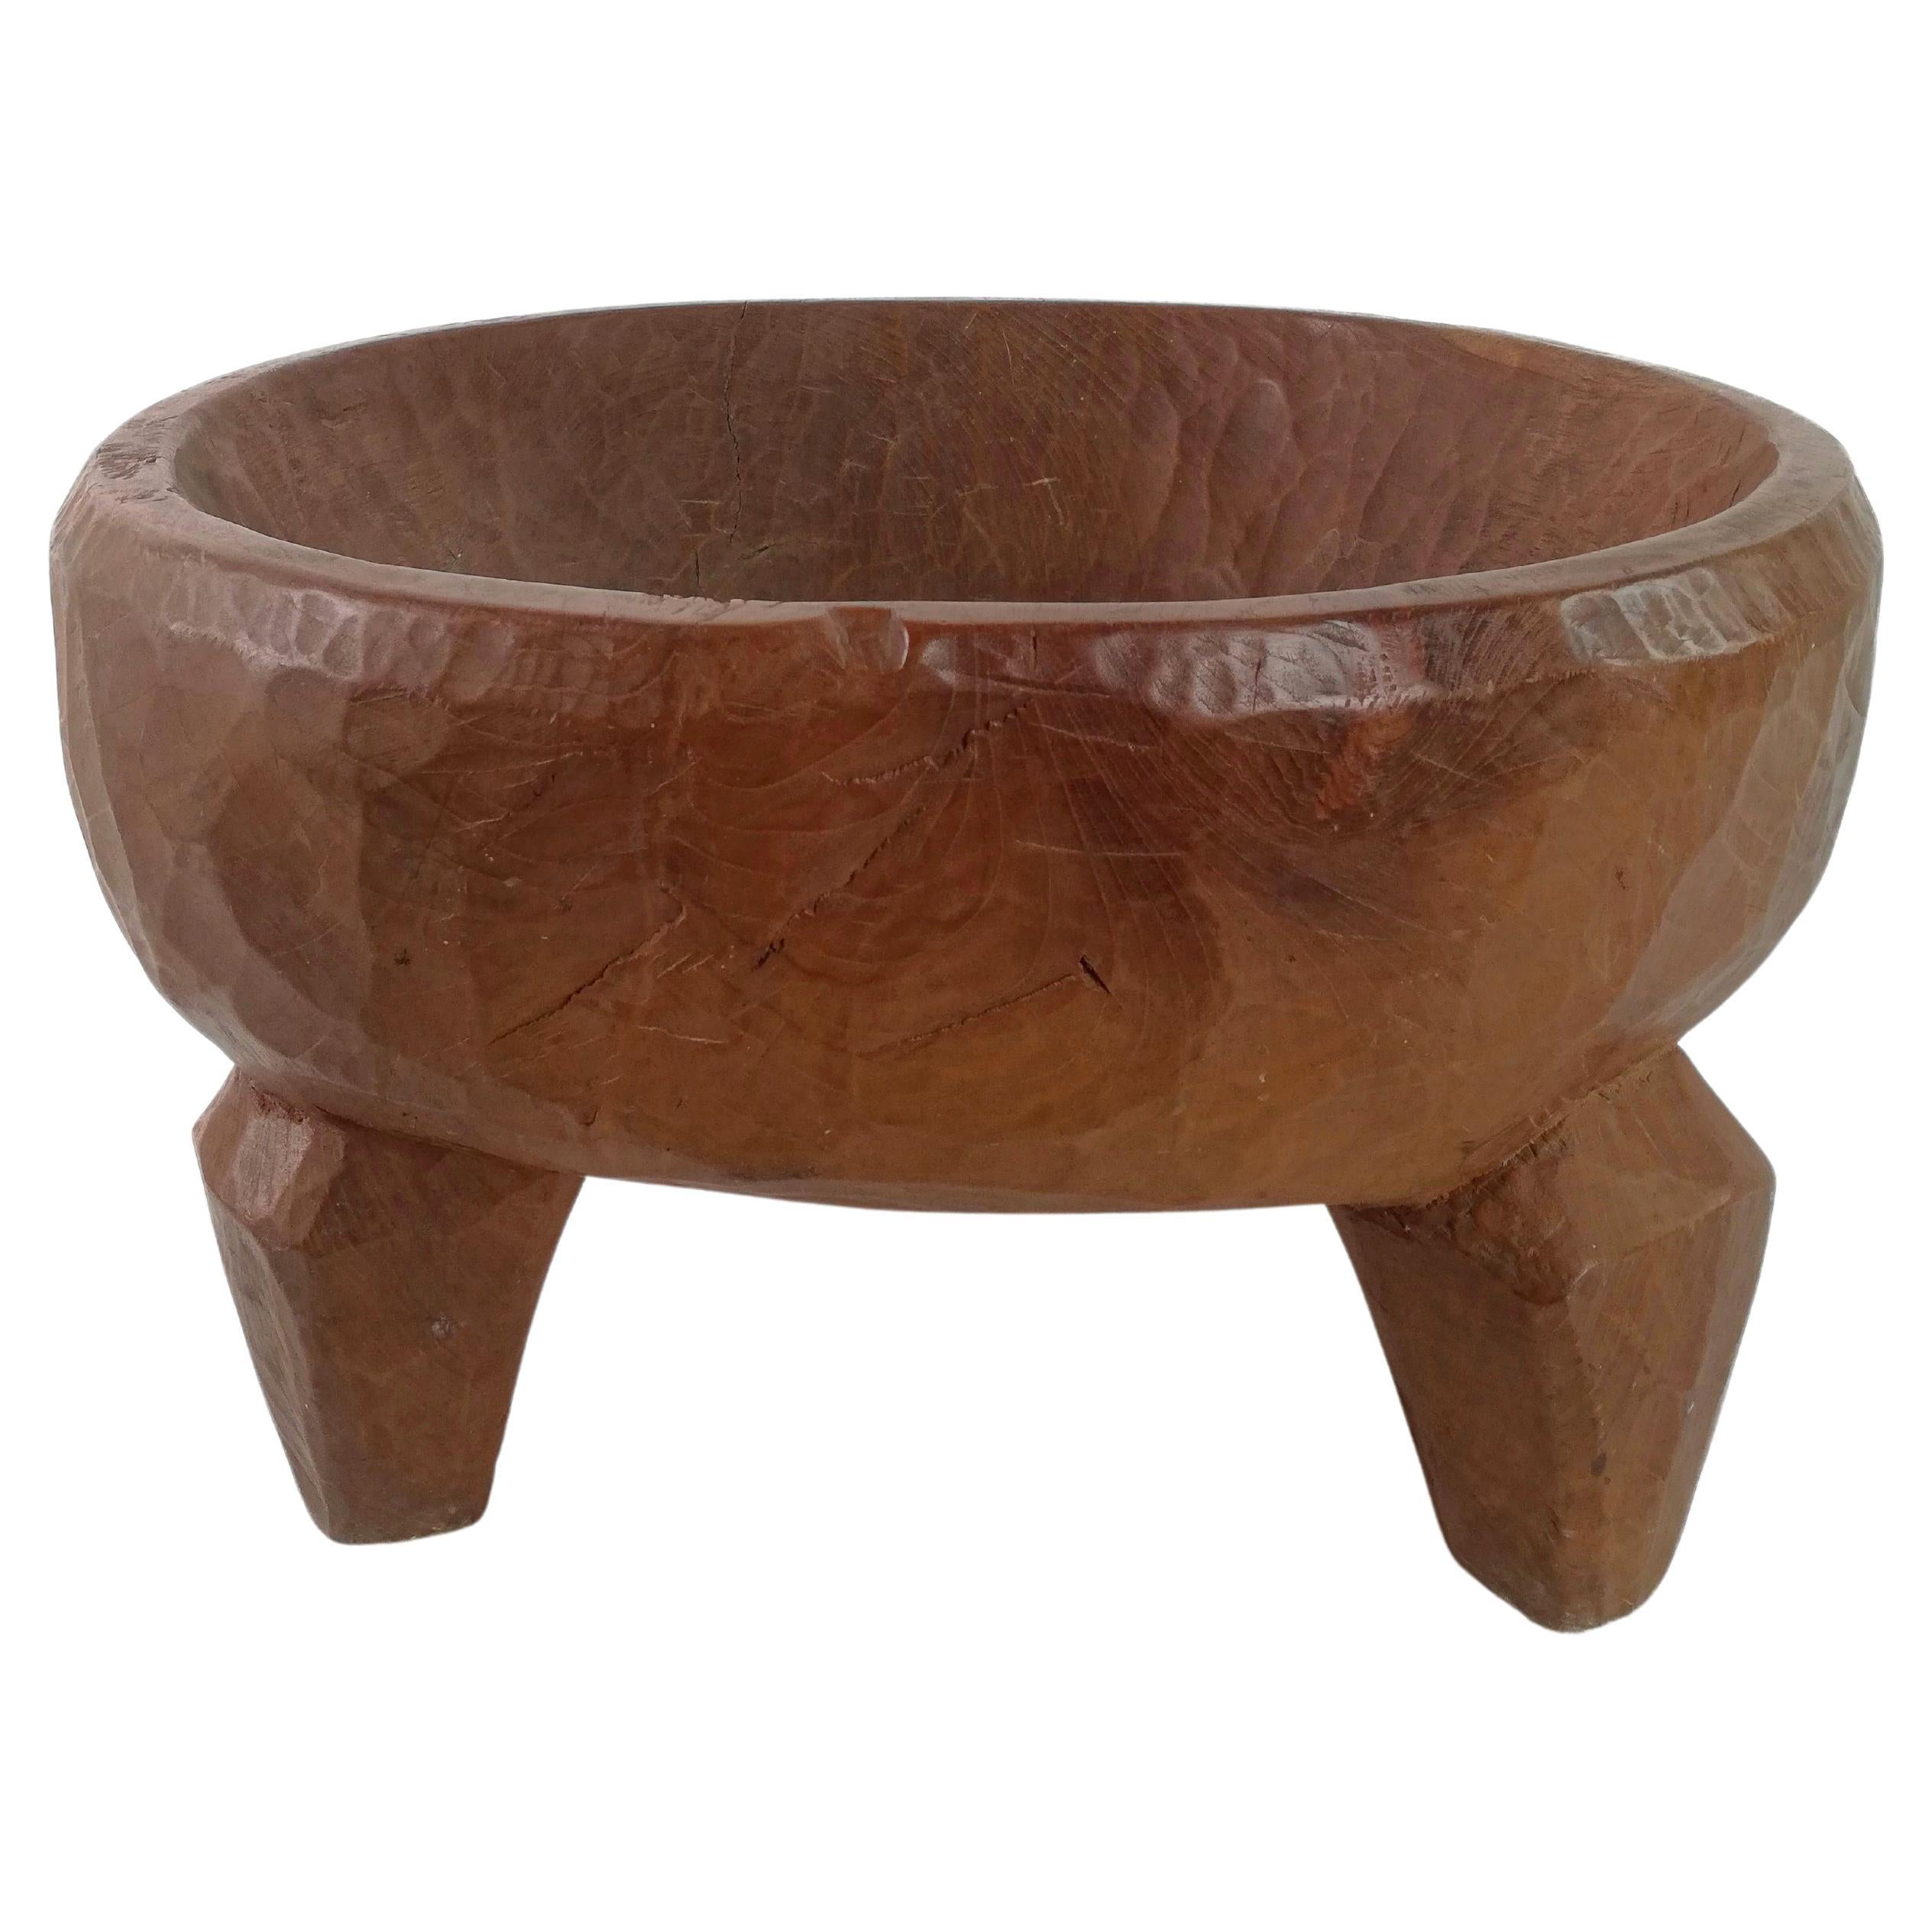 Large Tribal African bowl or Coffe Table in carved solid wood with legs